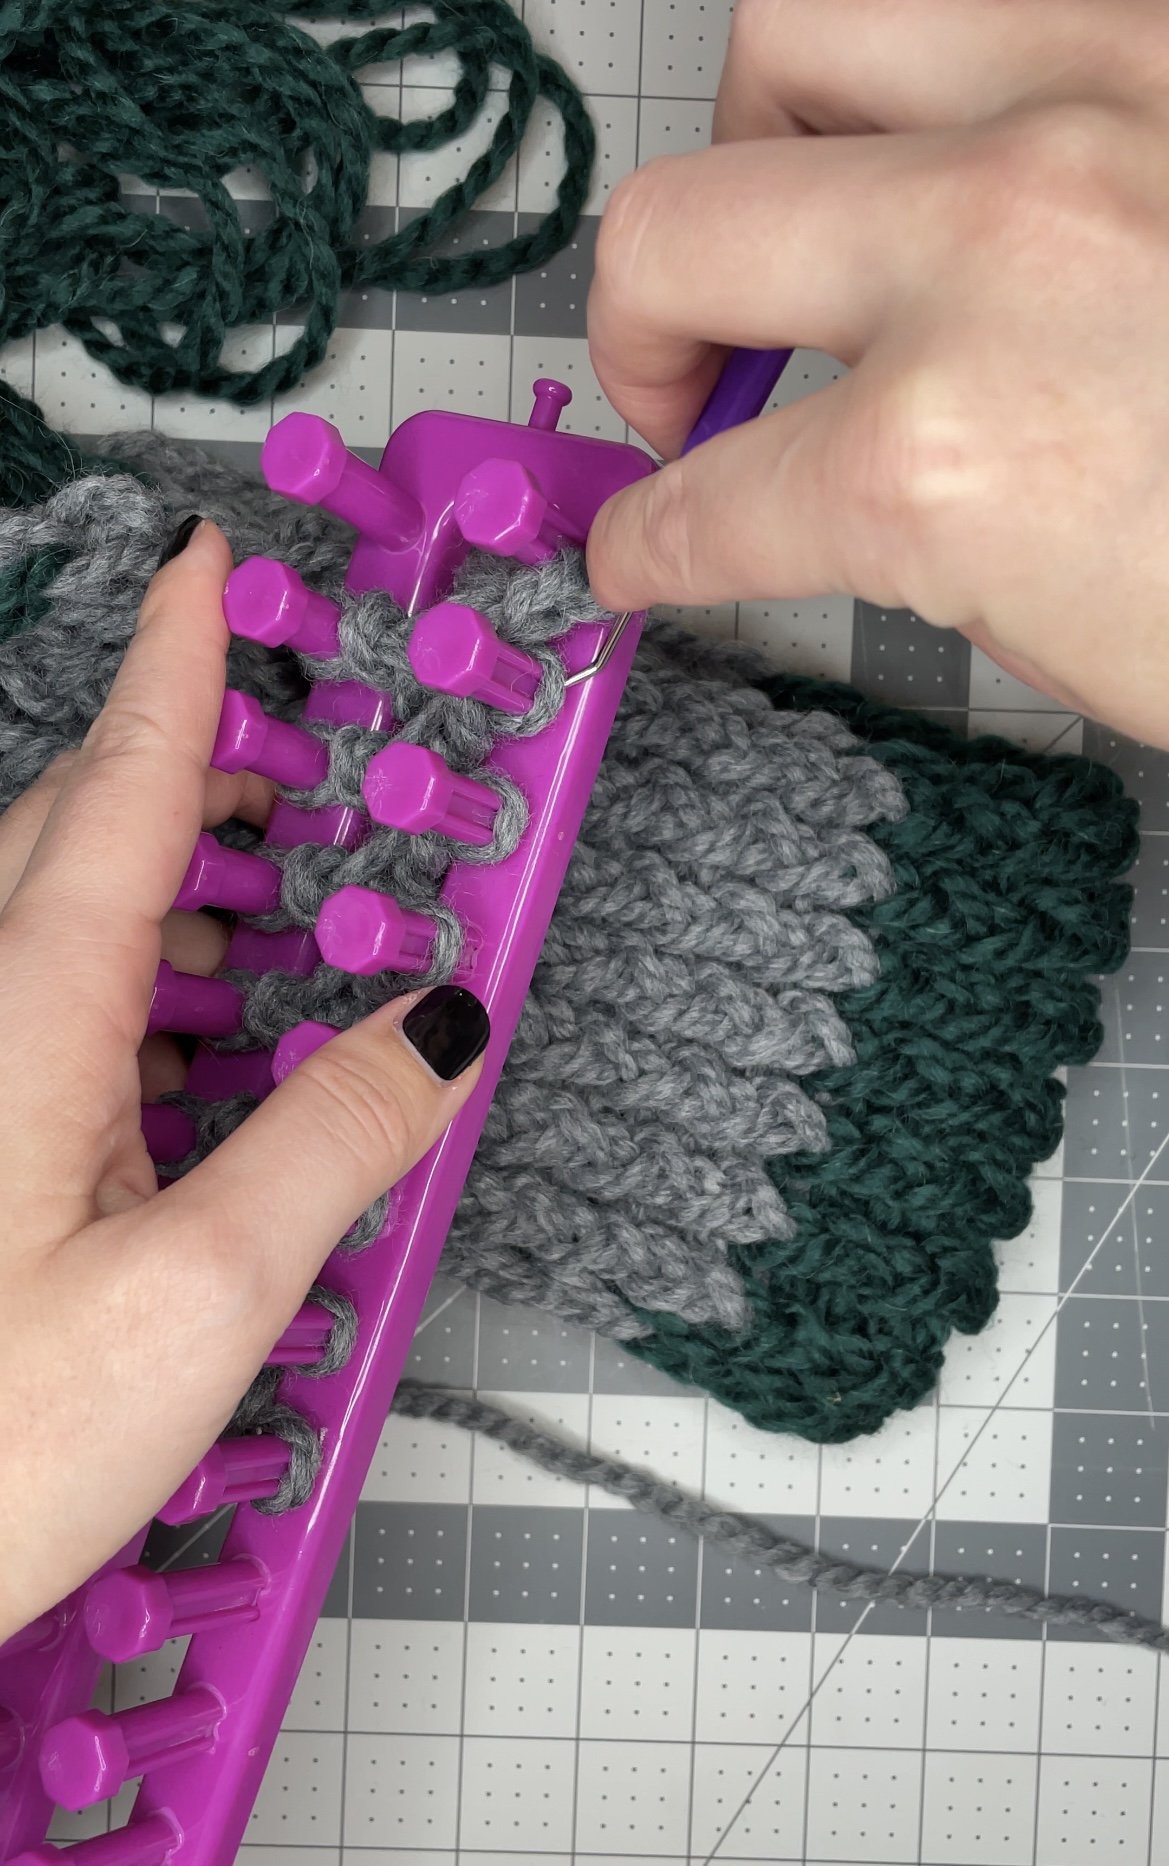 How to Knit an Infinity Scarf on a Loom